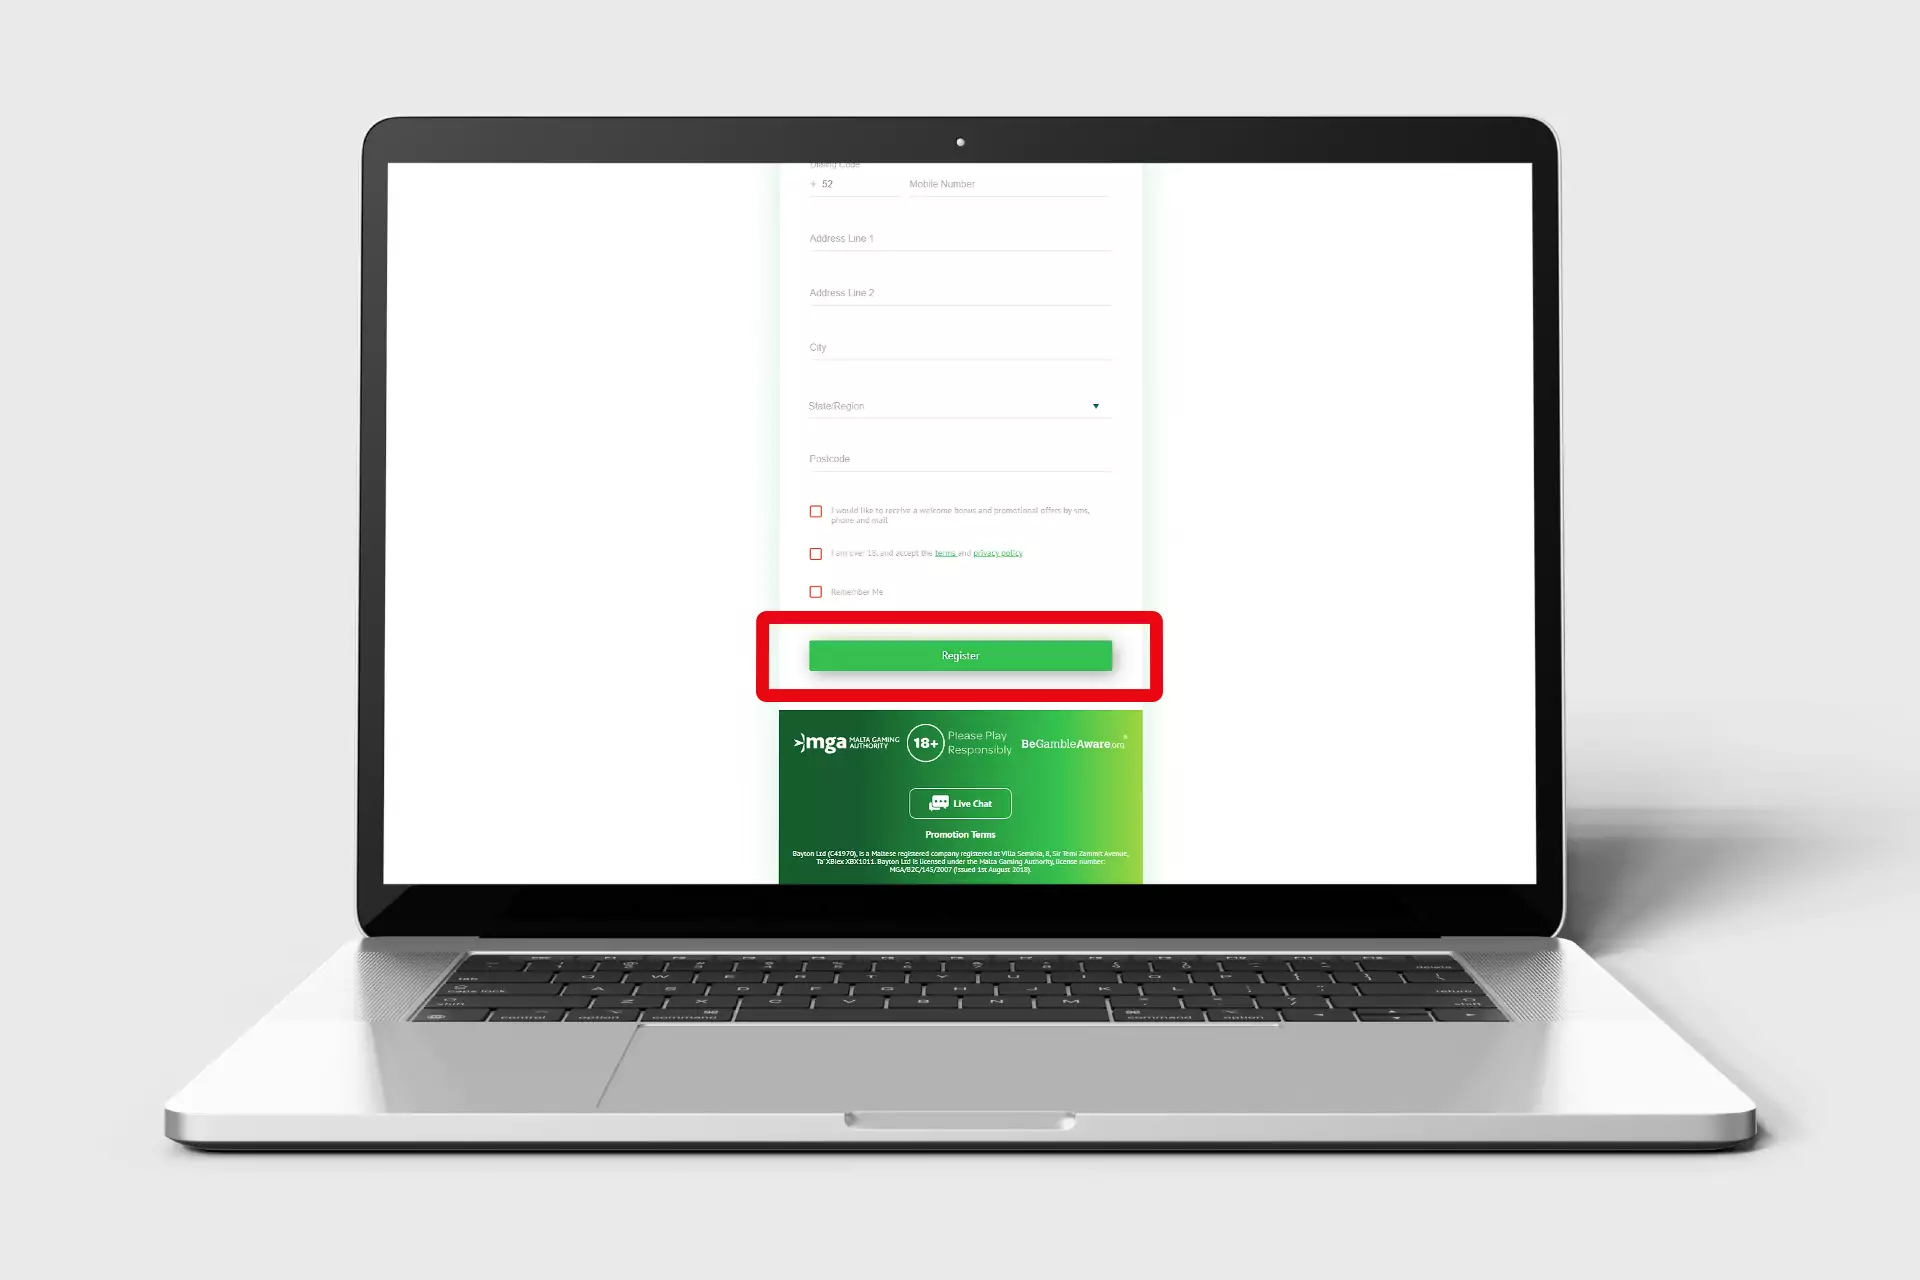 Press the 'Register' button in order to complete sign-up.